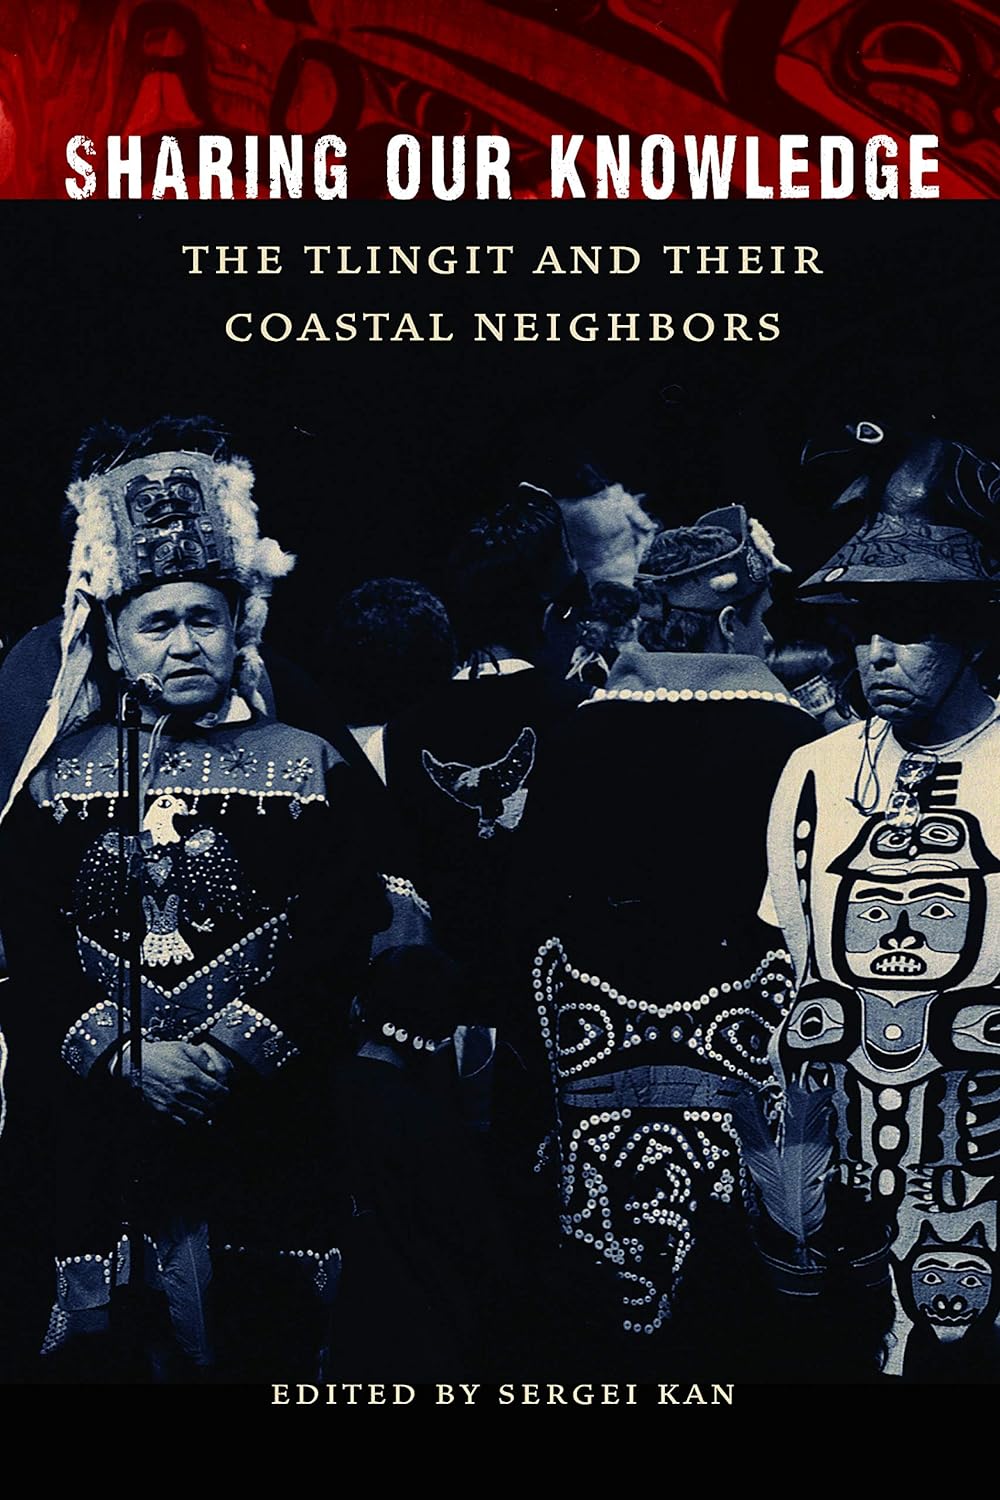 Sharing Our Knowledge: The Tlingit and Their Coastal Neighbors edited by Sergei Kan